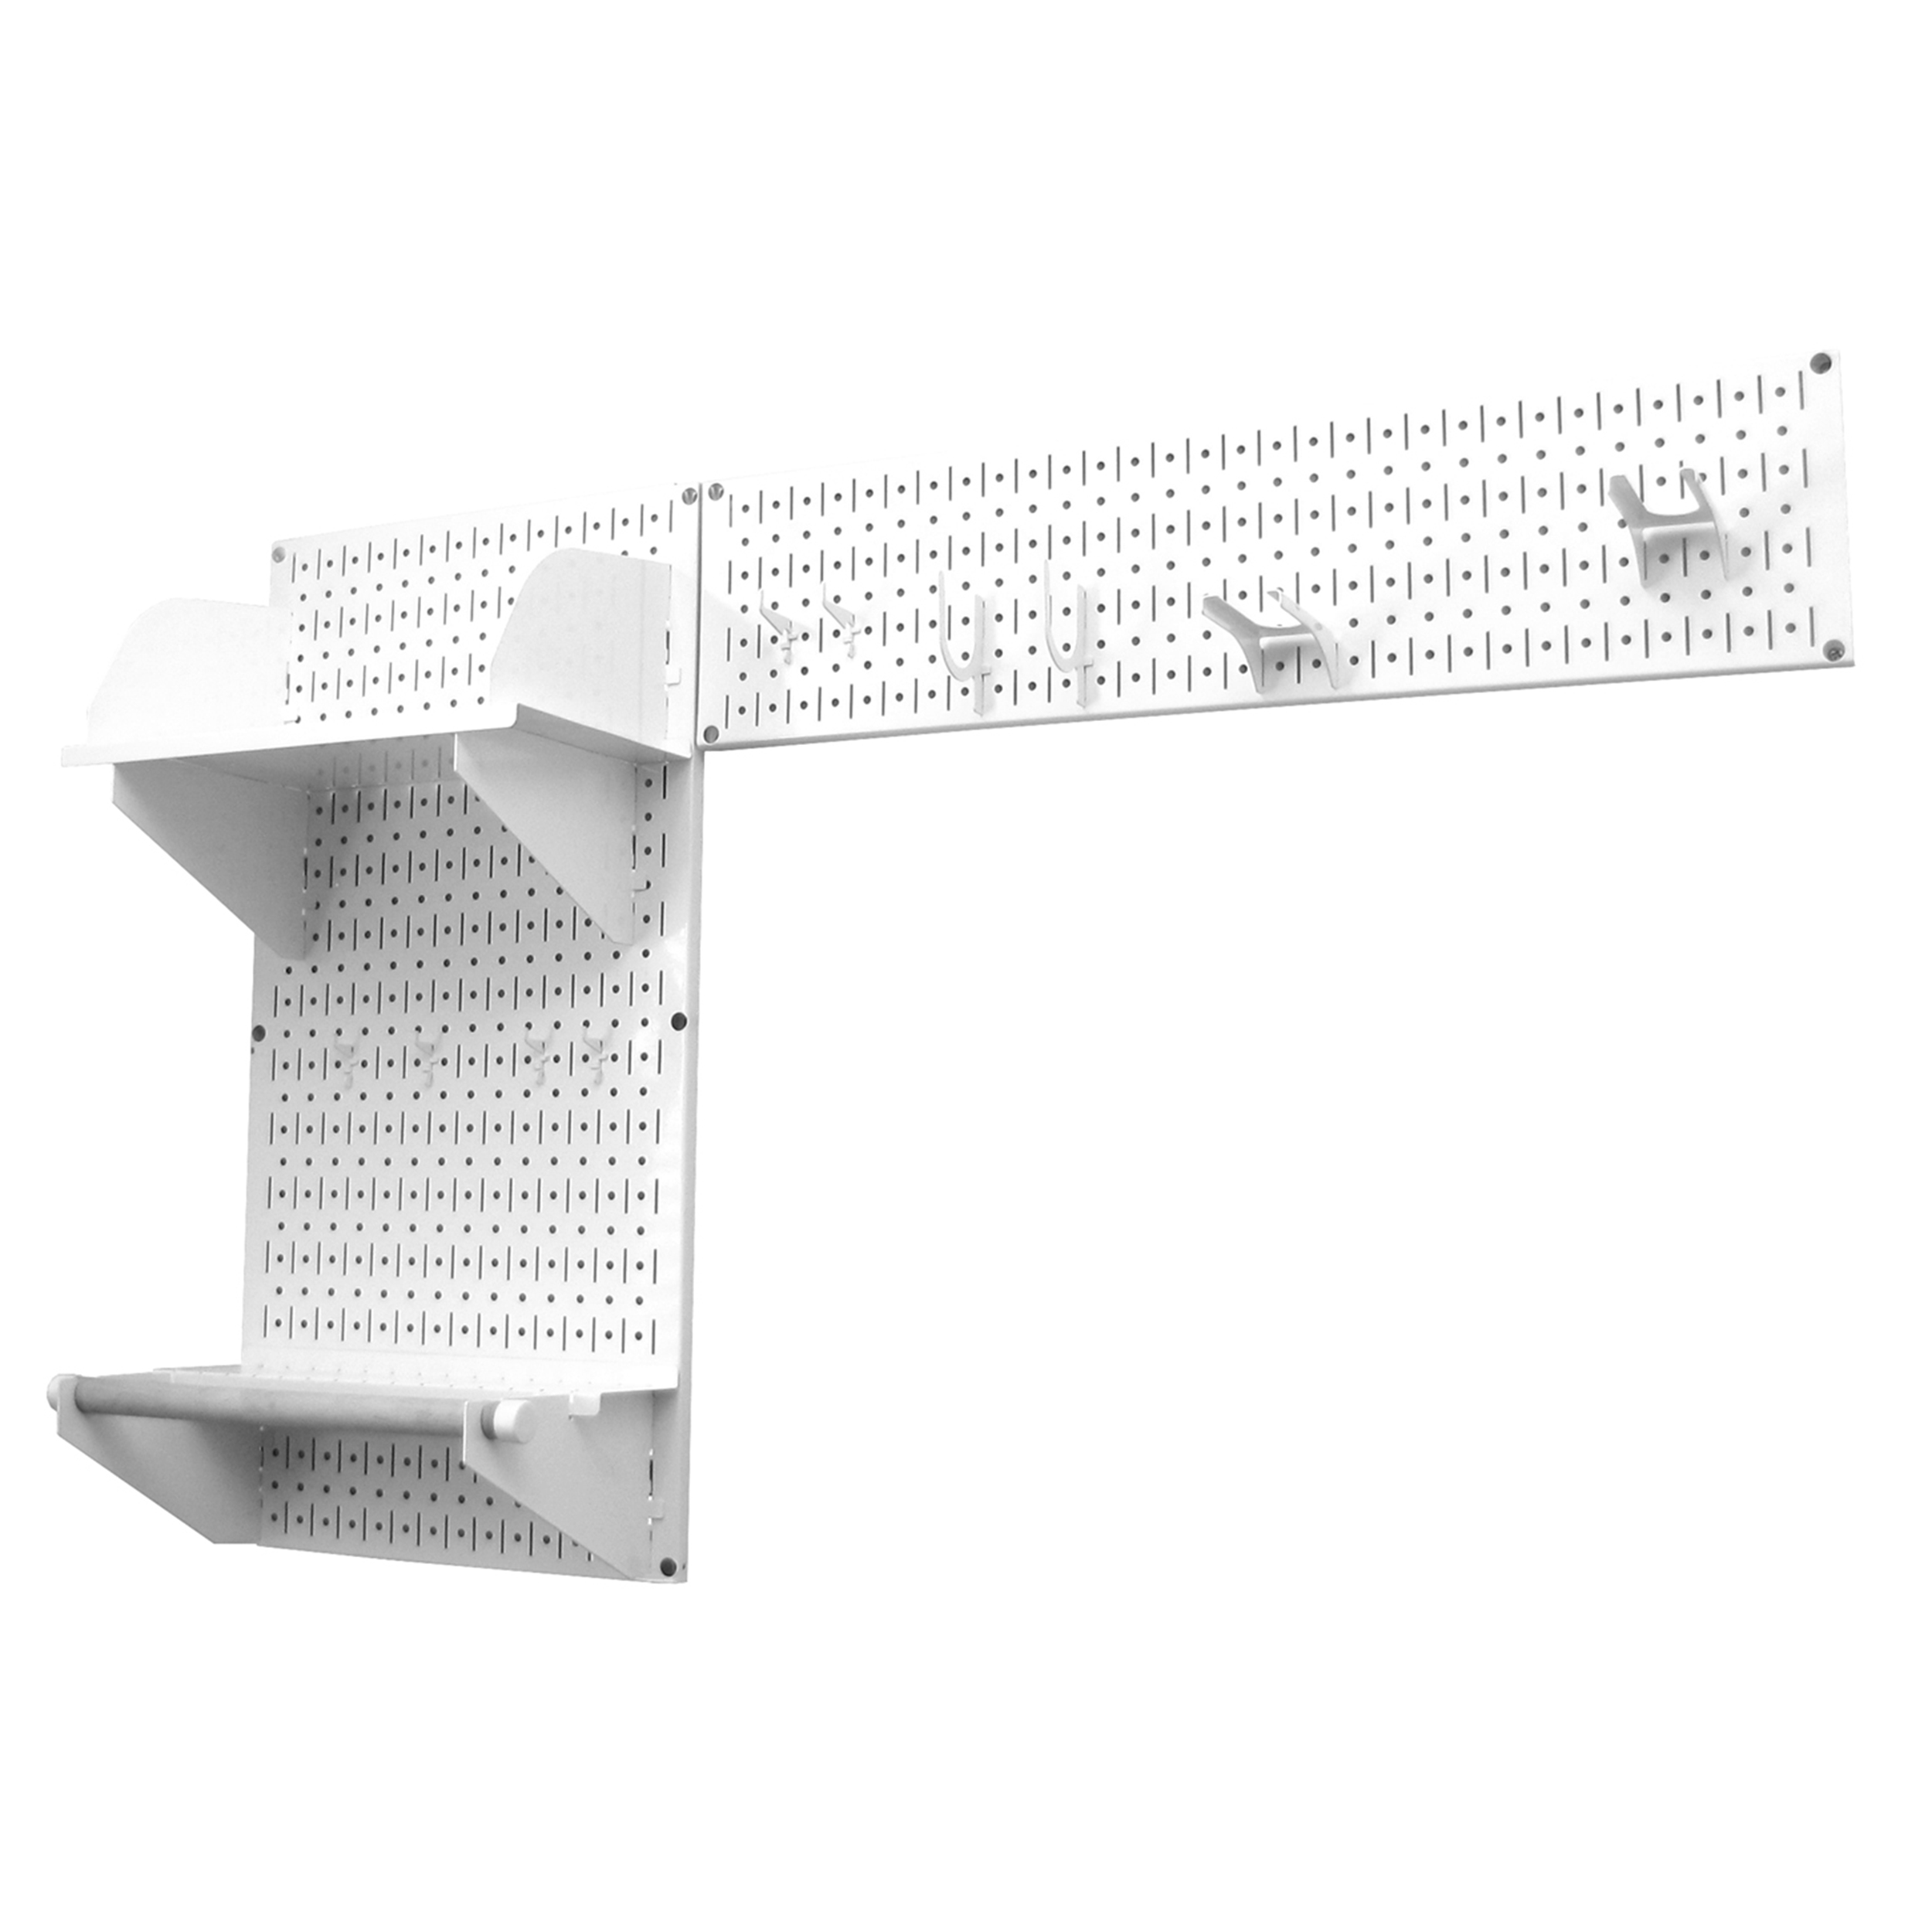 Pegboard Garden Tool Board Organizer With White Pegboard And White Accessories